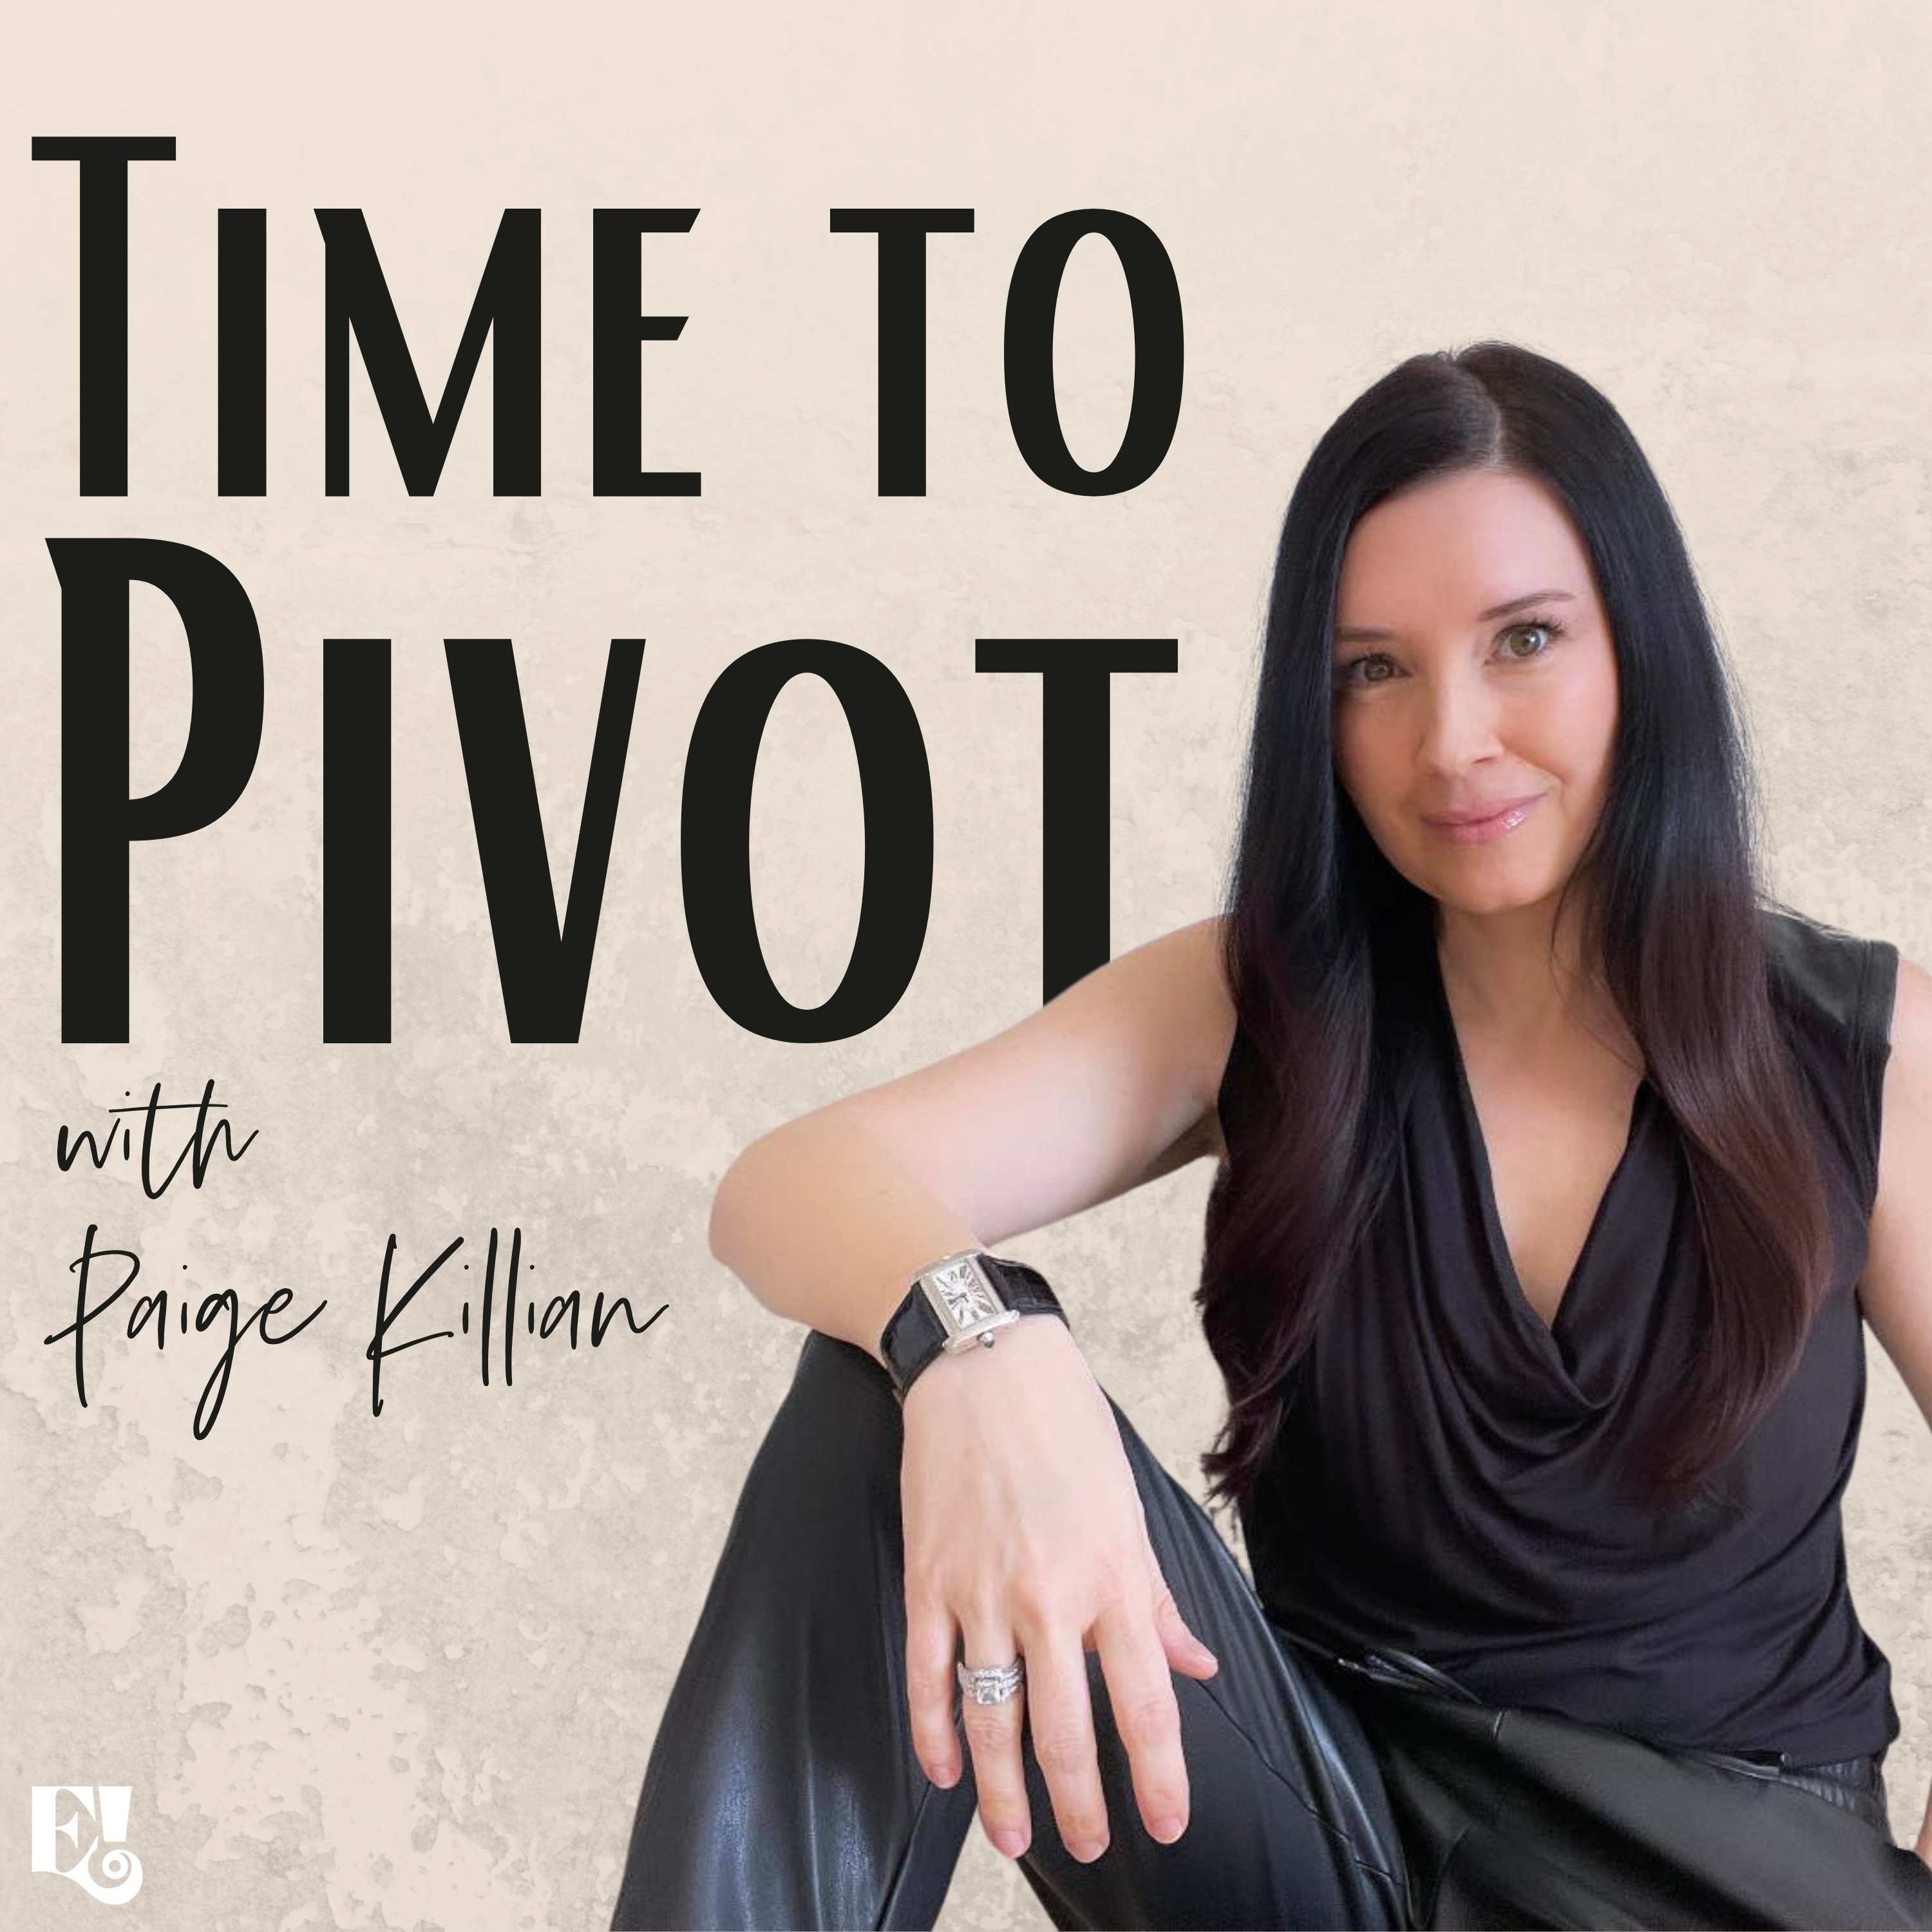 Artwork for Time to Pivot